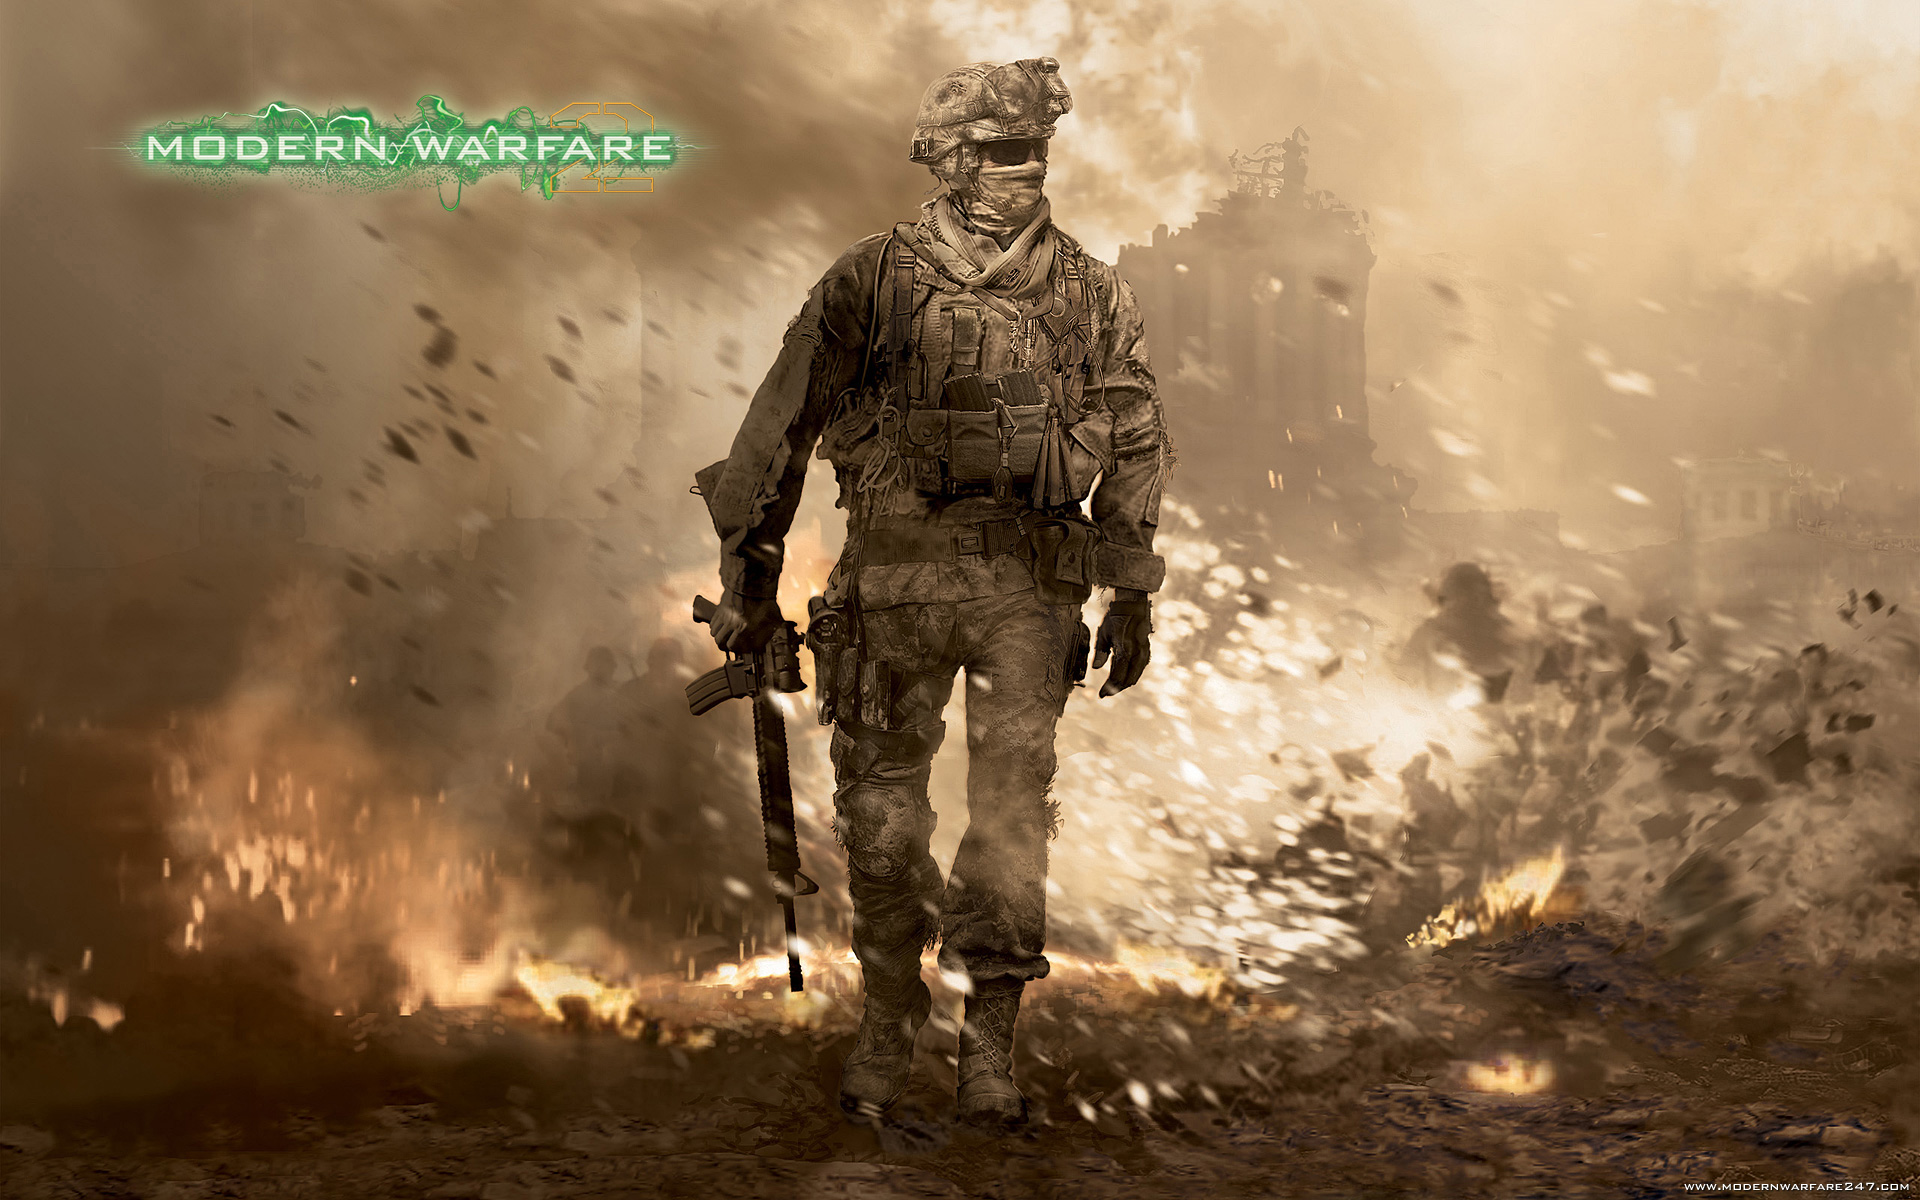 Cool call of duty wallpaper